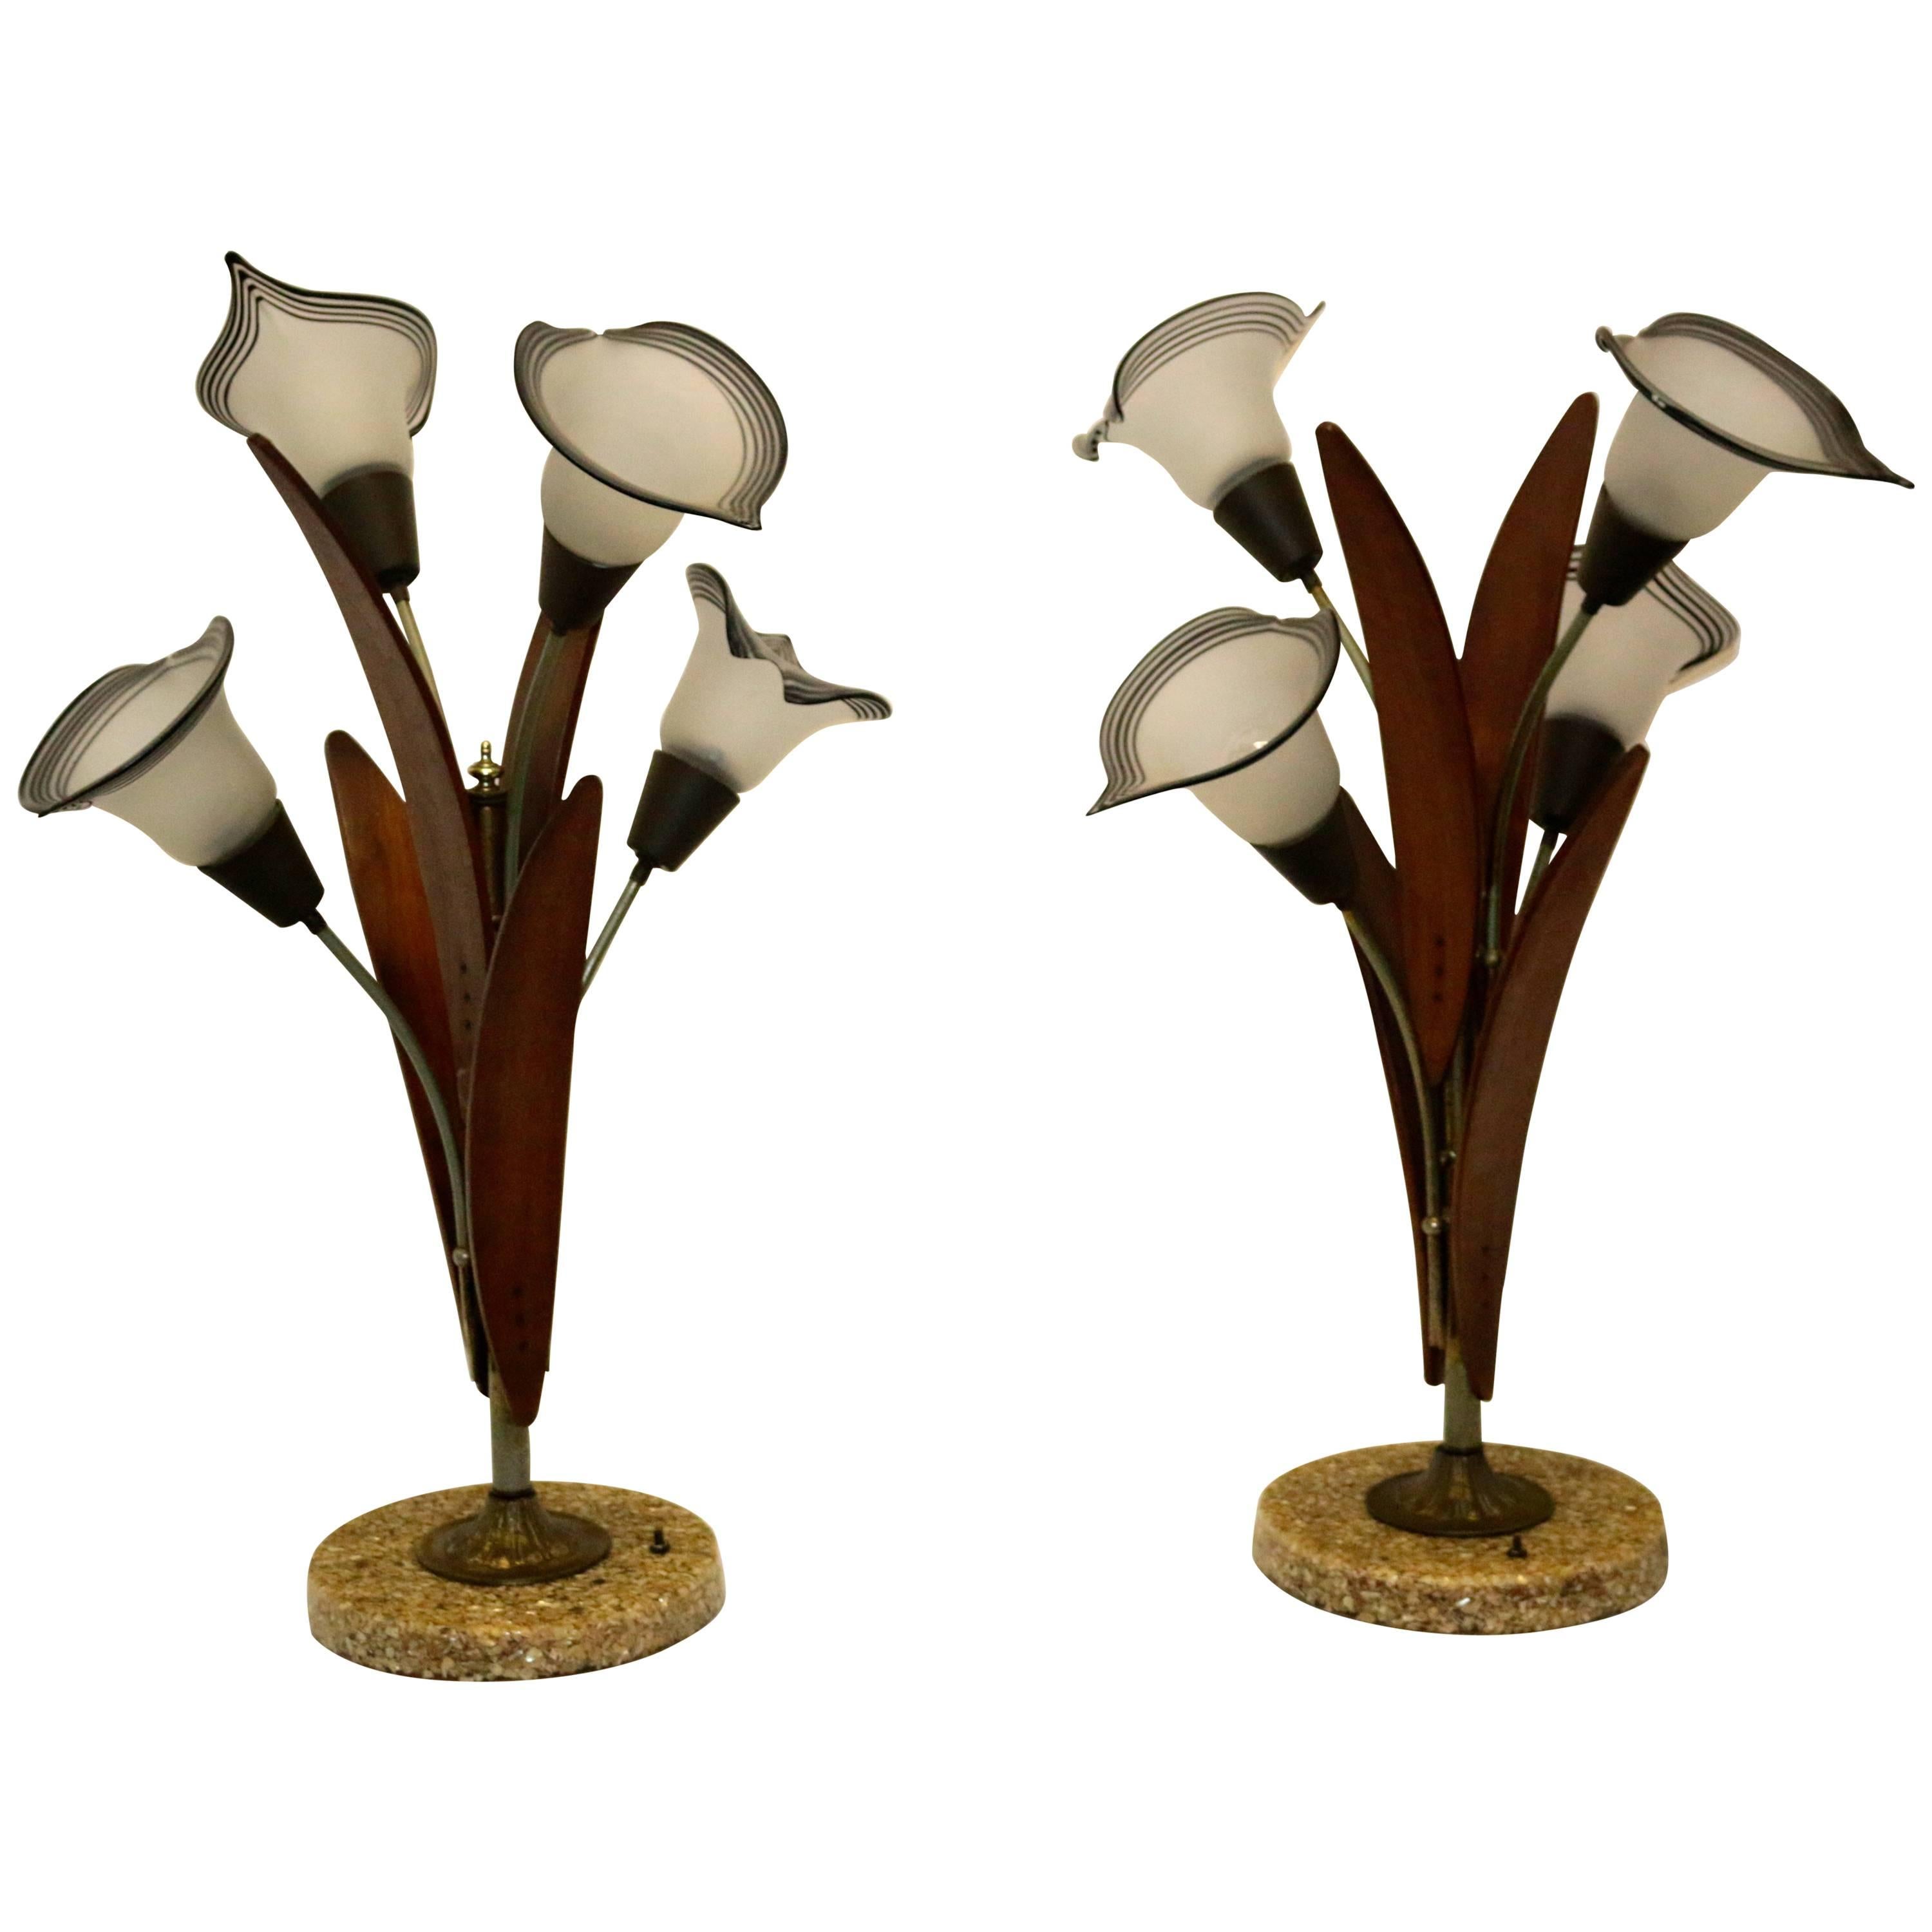 Pair of Mid-Century Teak Wood Table Lamps with Glass Shades